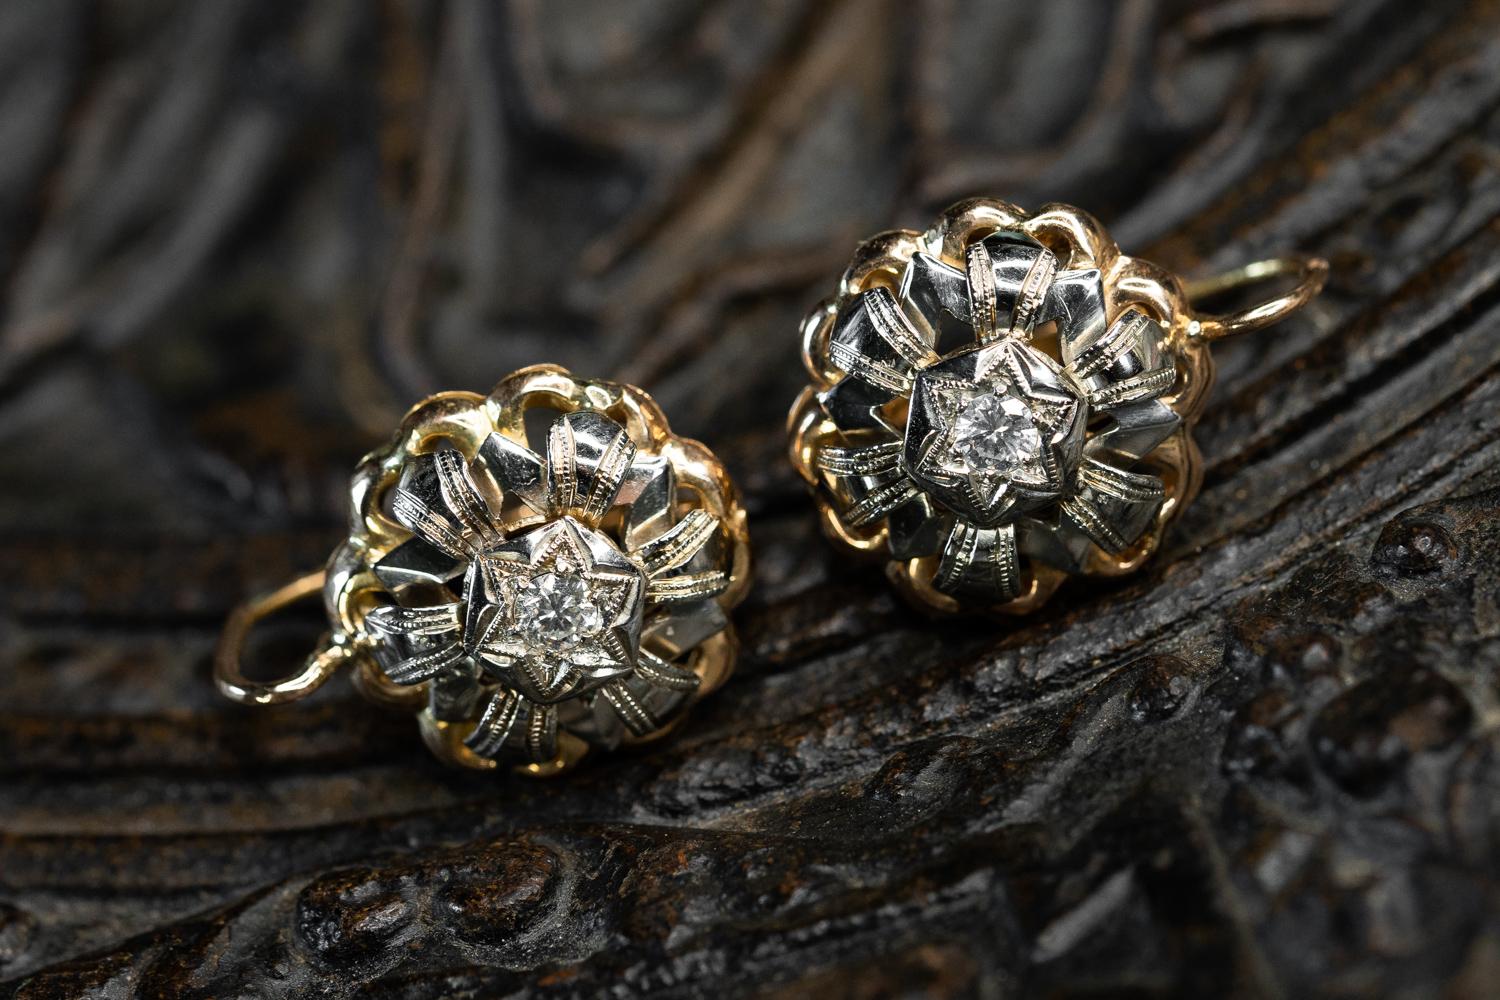 A gorgeous vintage pair of statement earrings solid 14k gold earrings. These floral diamond earrings are crafted in bi-color white and yellow gold and measure whooping 2.1 cm in diameter (0.8 inch).

These vintage 1960s earrings originate in Italy,